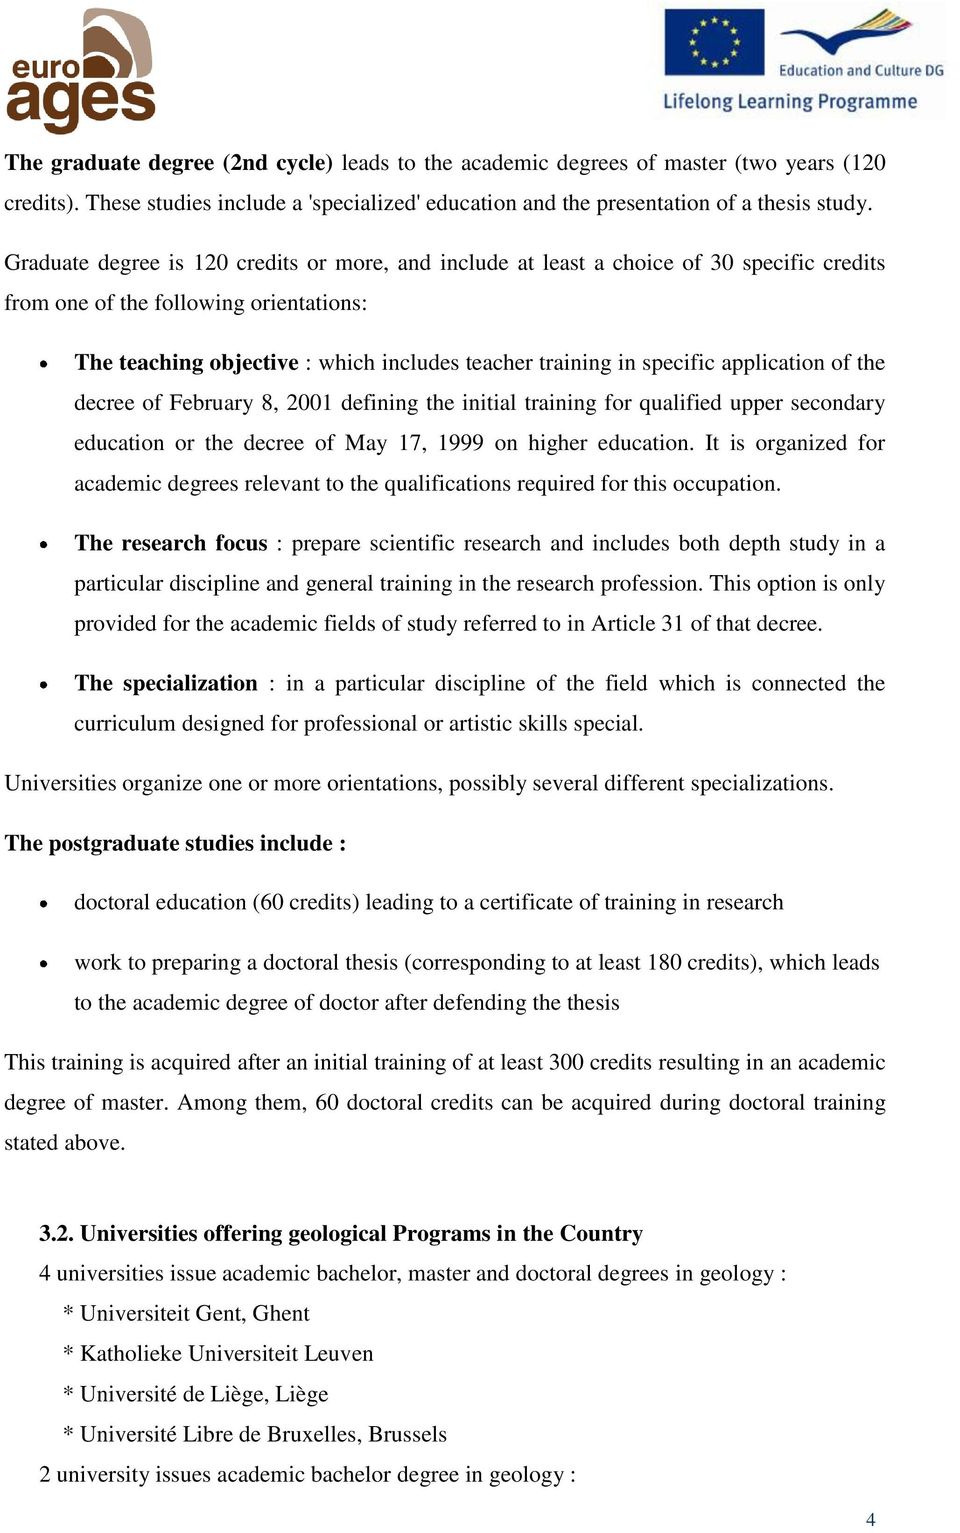 specific application of the decree of February 8, 2001 defining the initial training for qualified upper secondary education or the decree of May 17, 1999 on higher education.